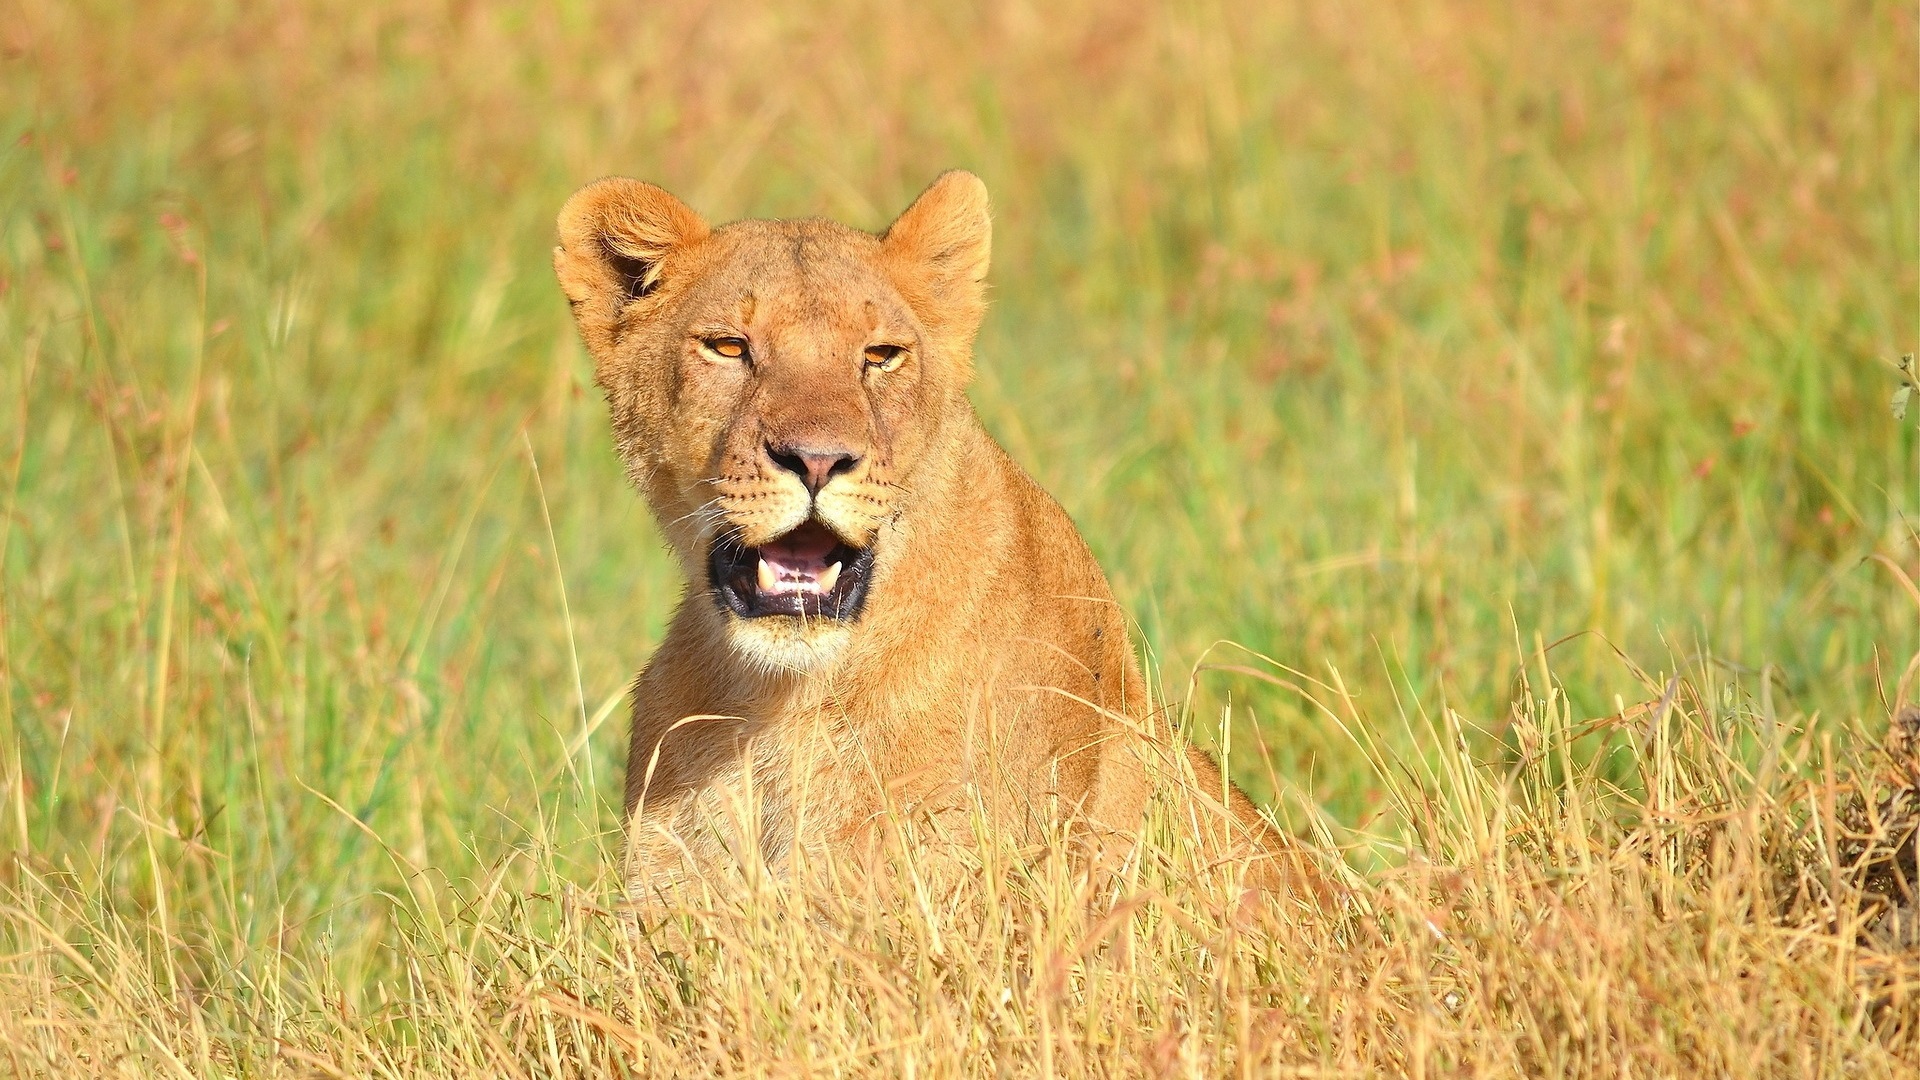 Wallpaper Lioness open mouth 1920x1200 HD Picture, Image